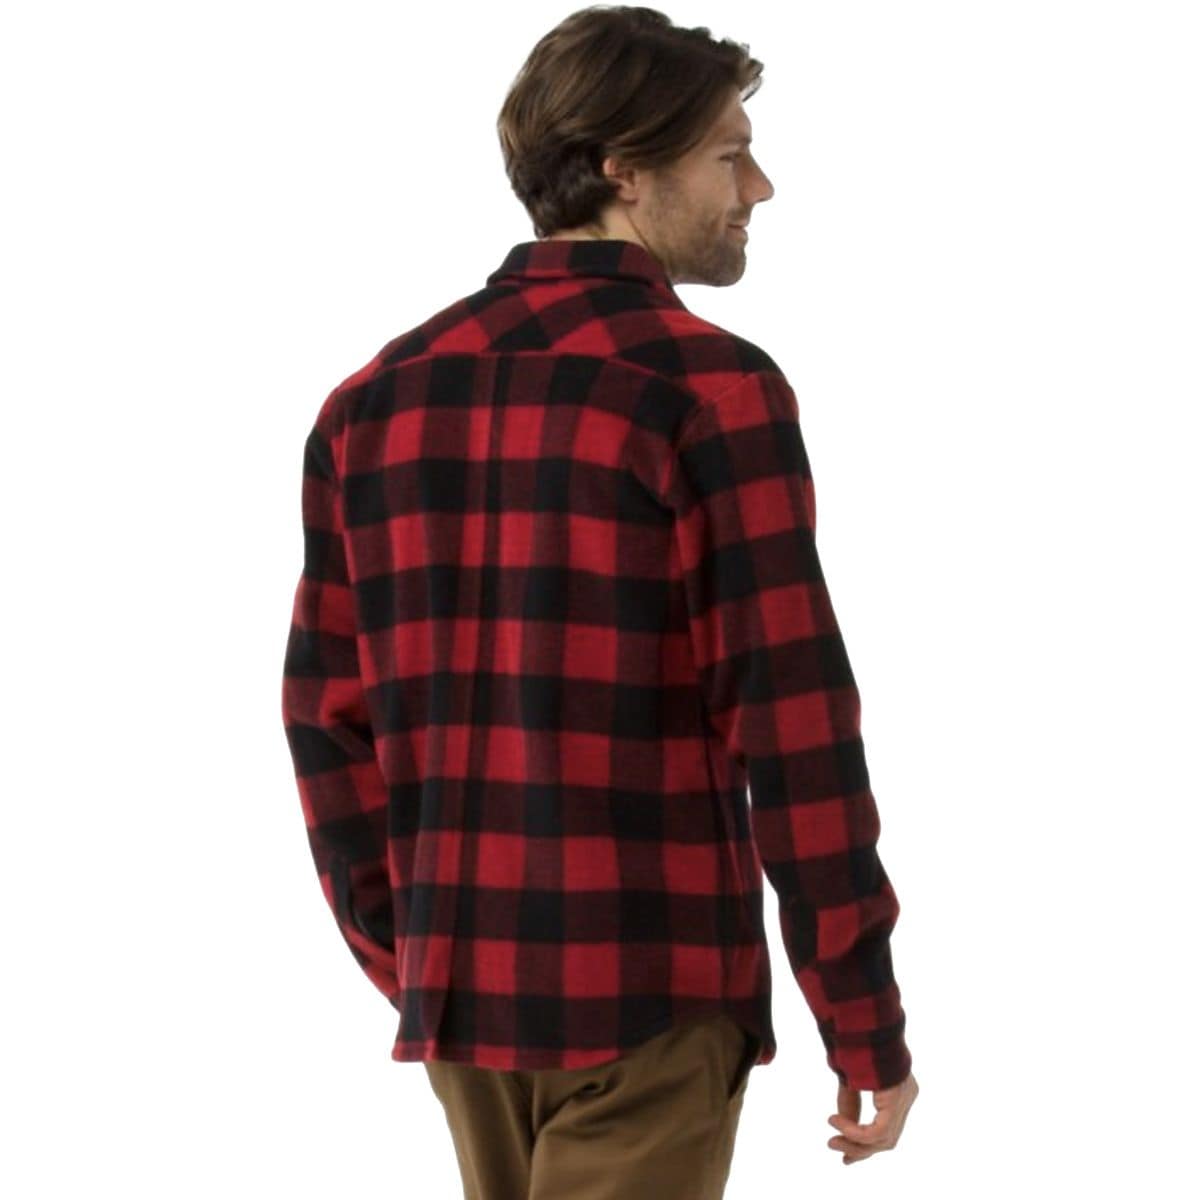 Smartwool Summit County Quilted Shirt Jacket - Men's - Clothing